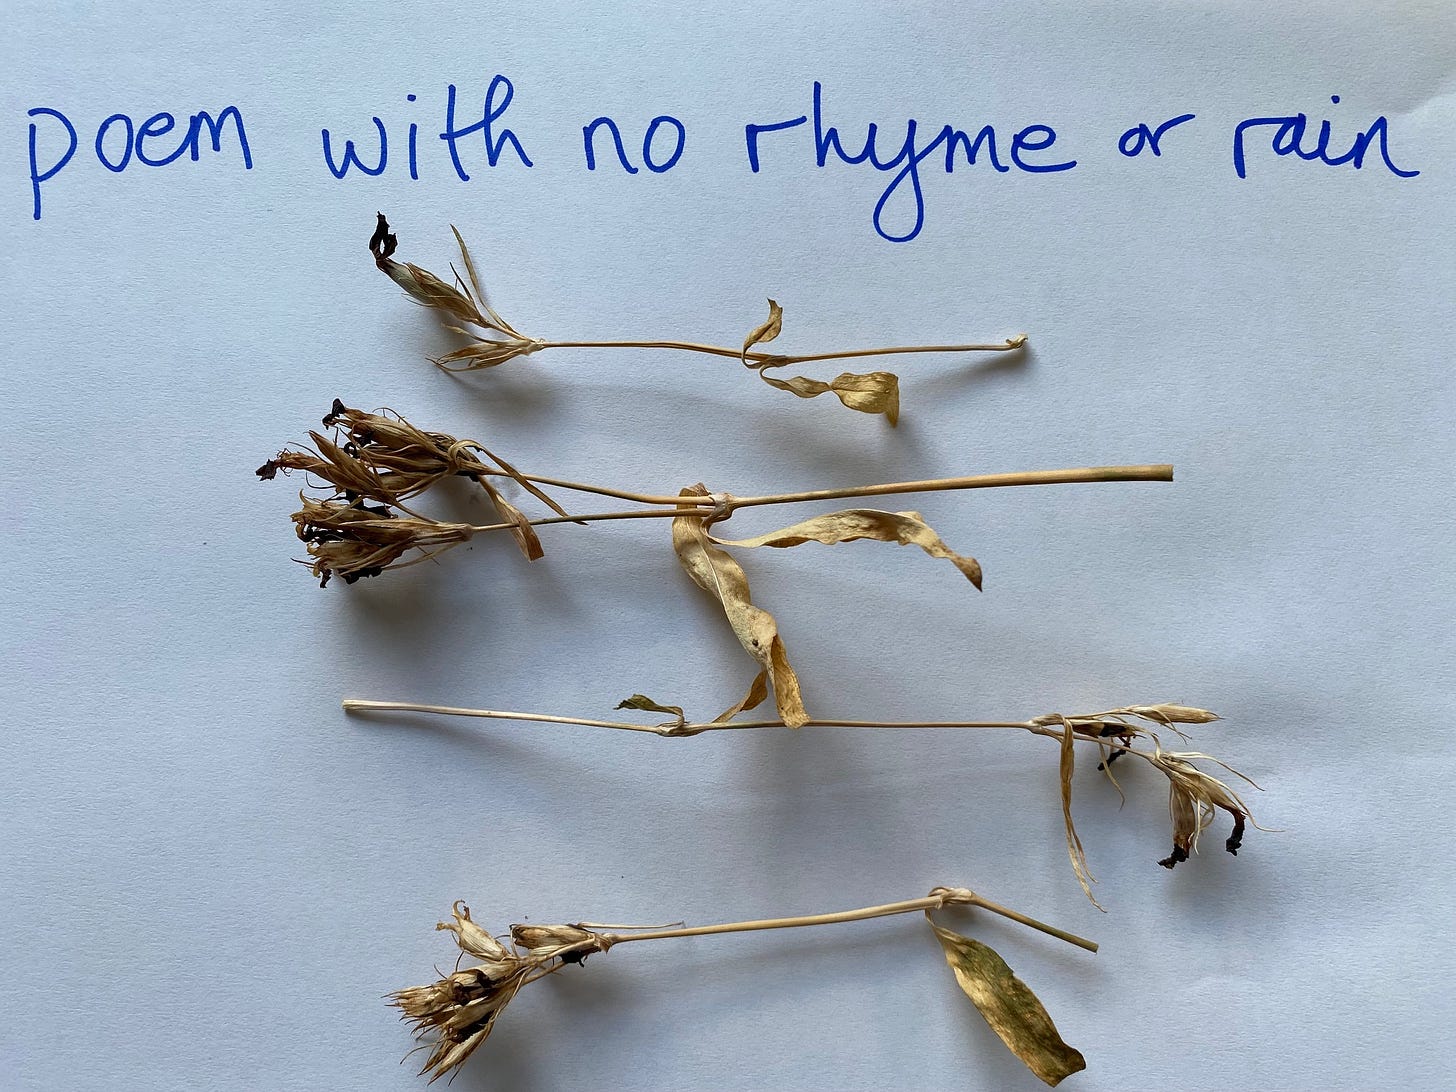 Four parched stalks and foliage from a plant arranged in four lines on a plain white page as if lines from a poem.  Handwritten text reads "poem with no rhyme or rain".